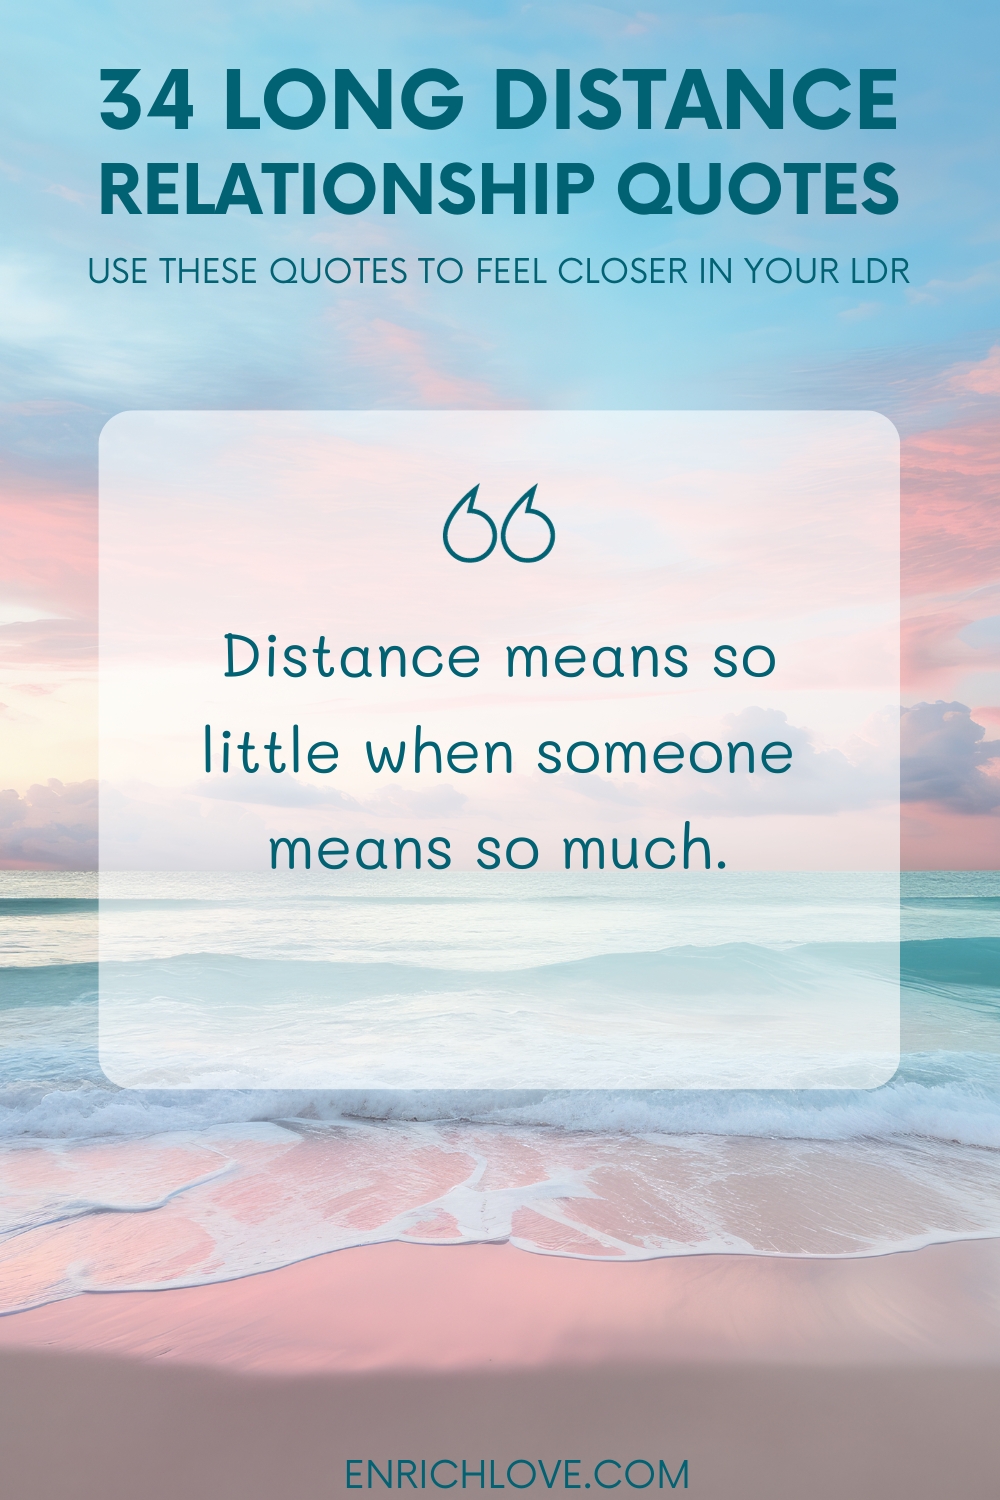 34 Long Distance Relationship Quotes - Distance means so little when someone means so much.